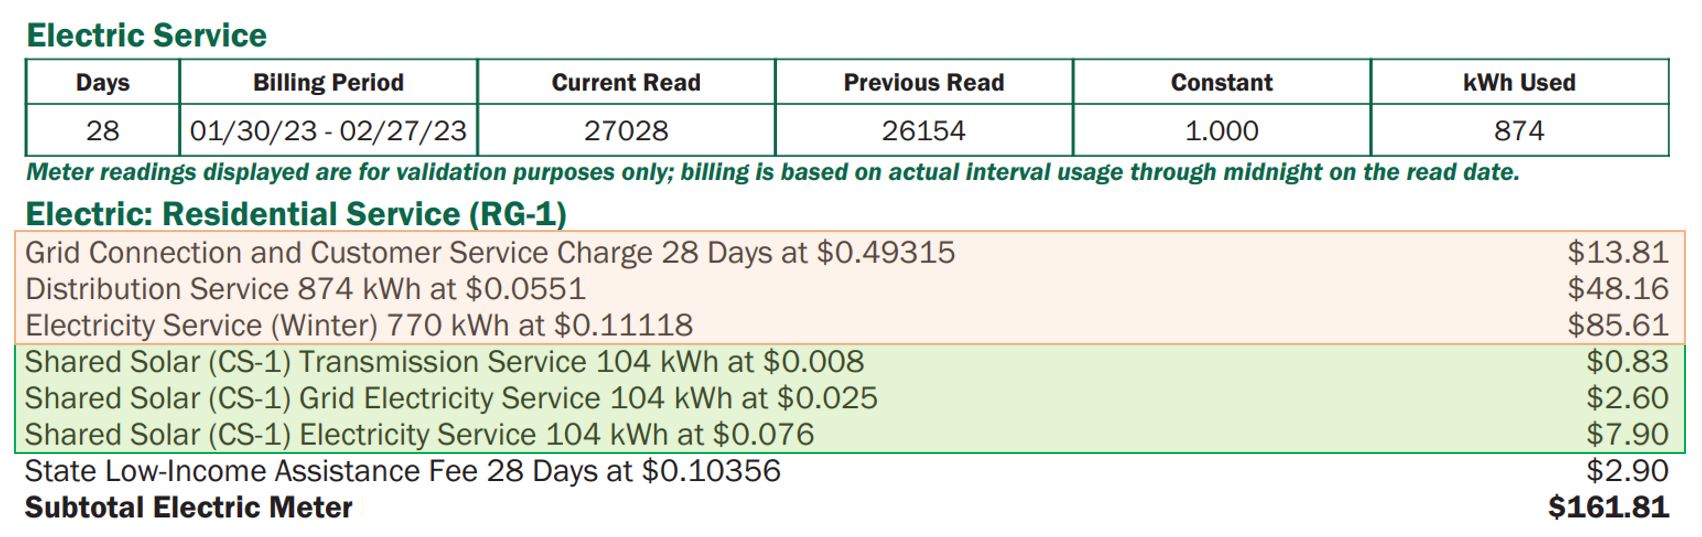 Example bill for residential electric service participating in Shared Solar